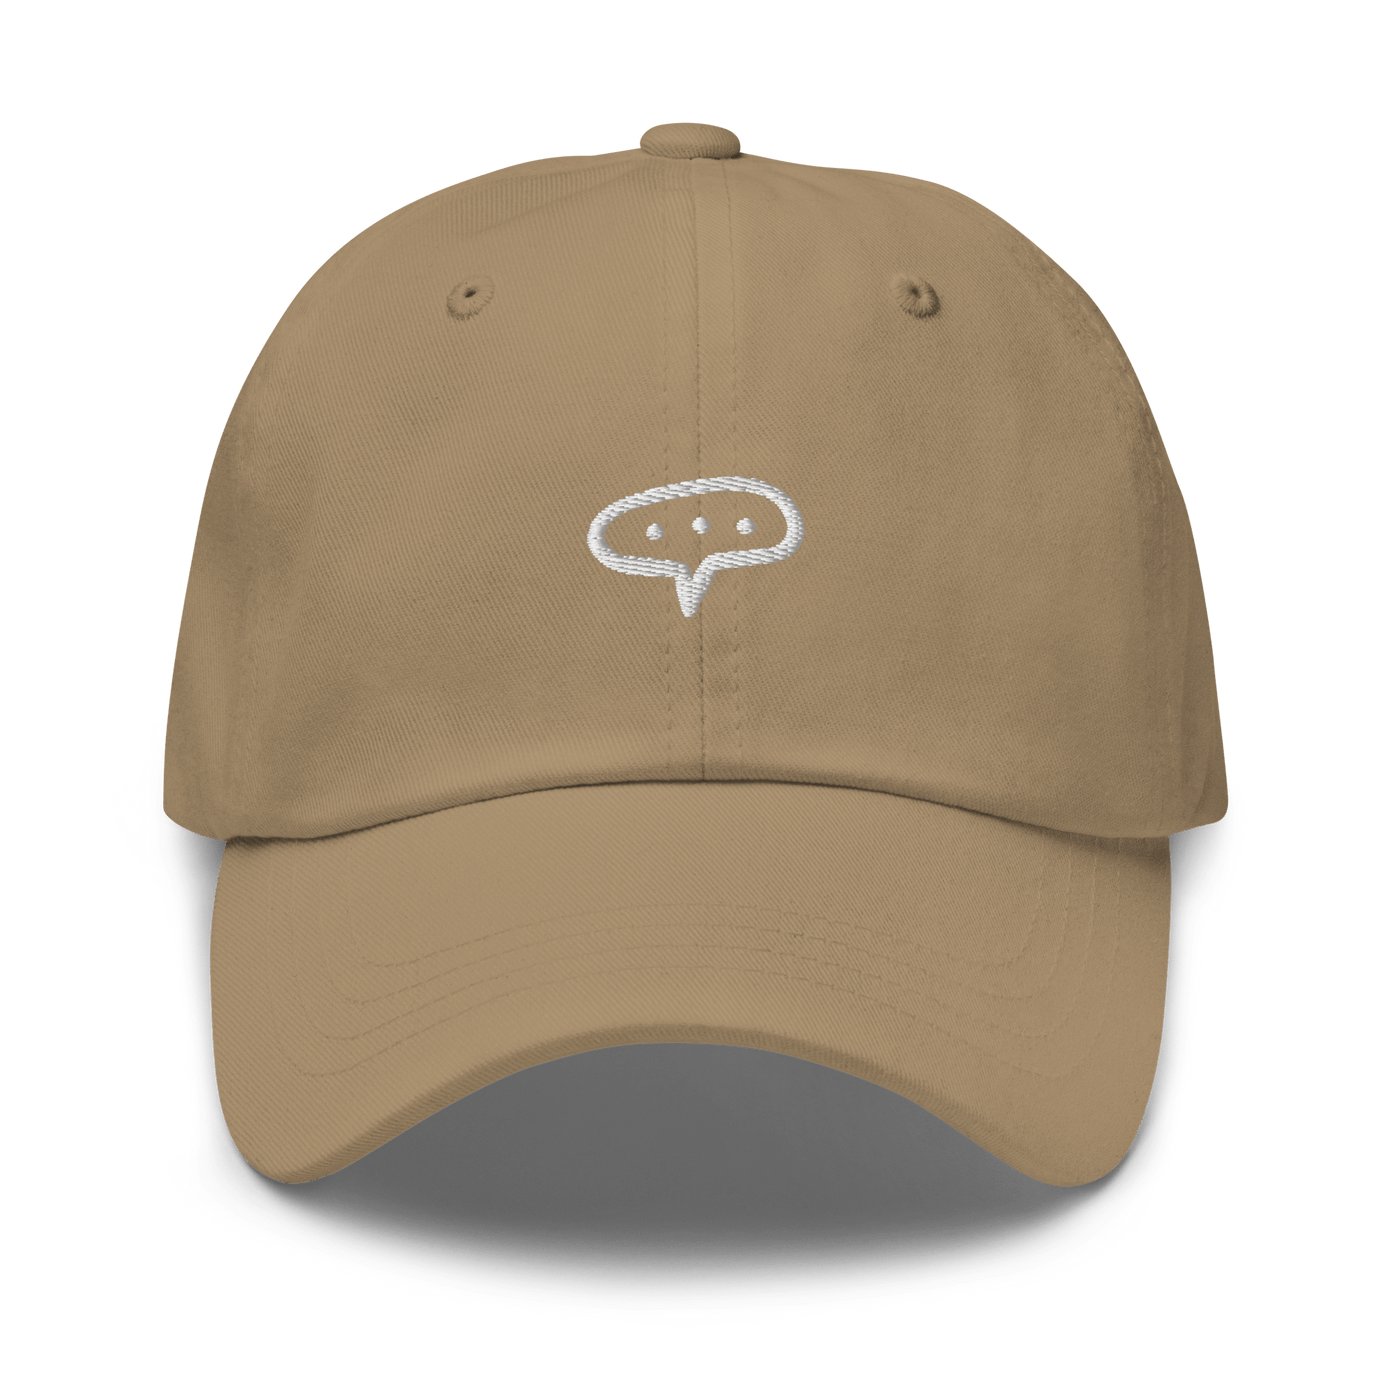 Thinking Dad hat - Khaki - - Just Another Cap Store